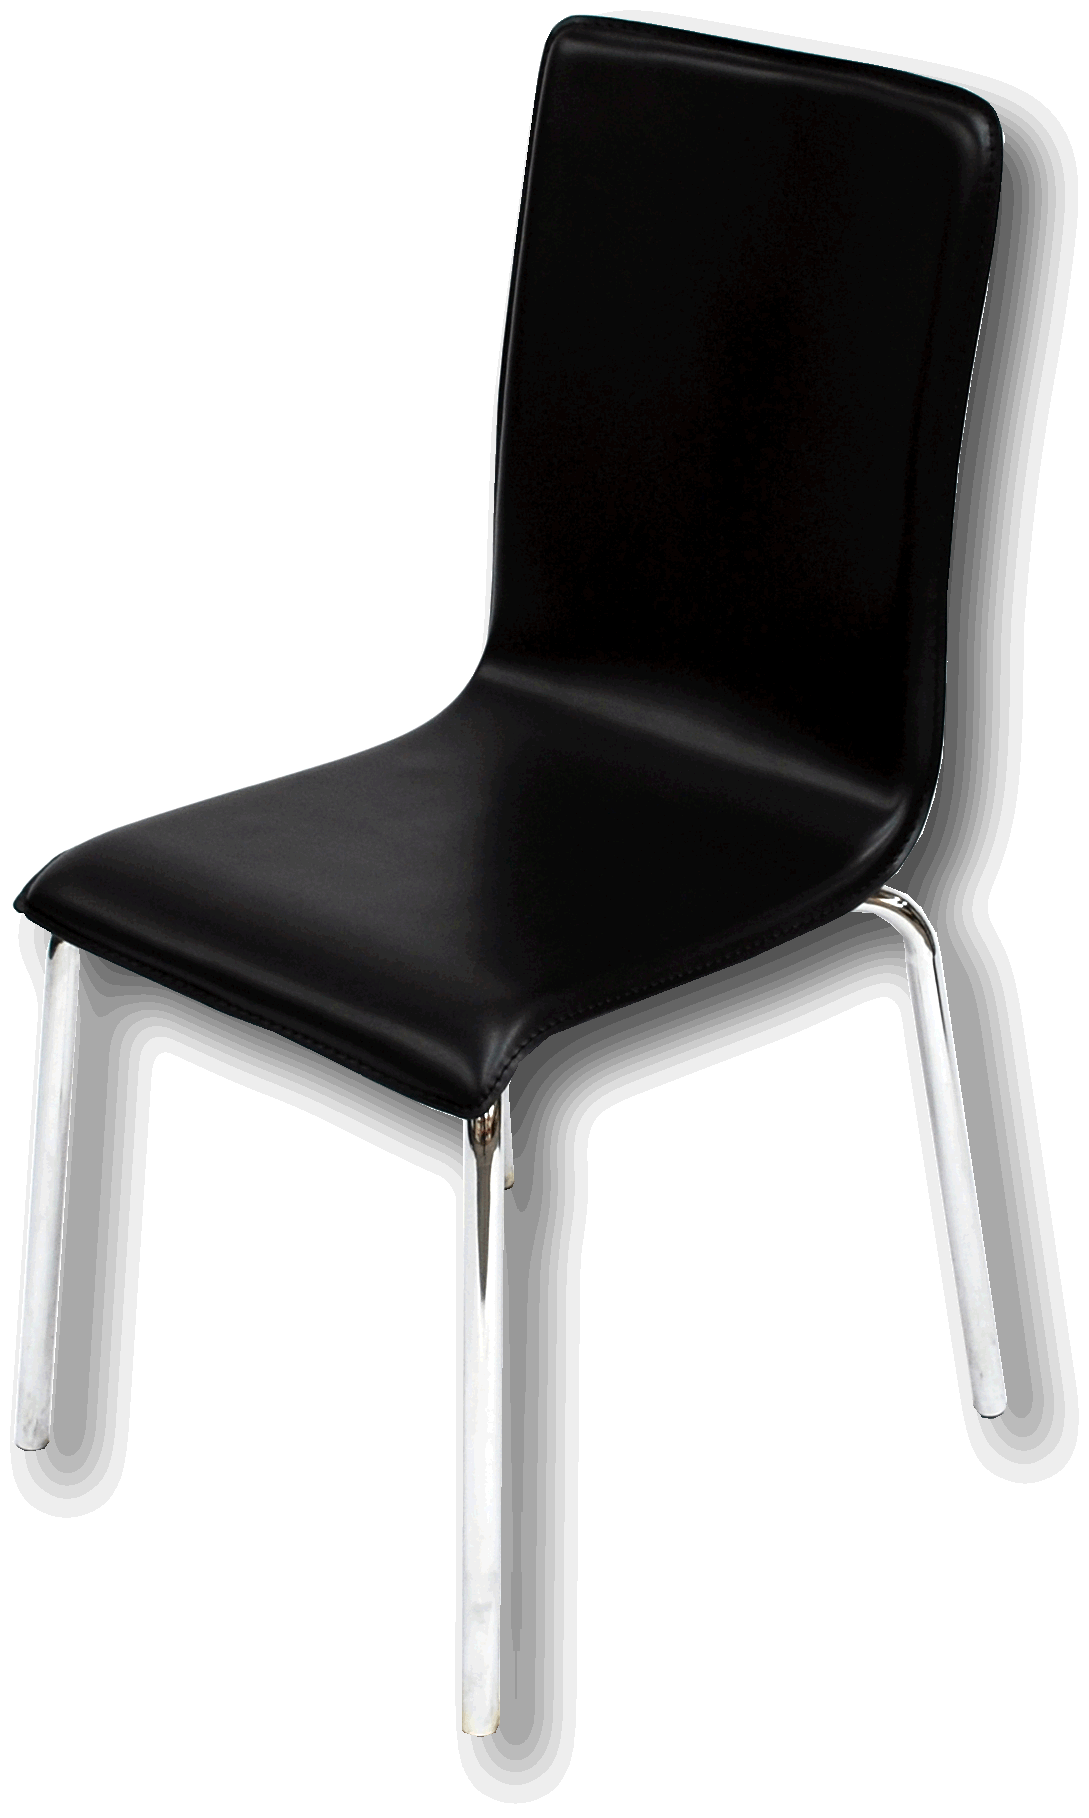 Chair Png Picture PNG Image